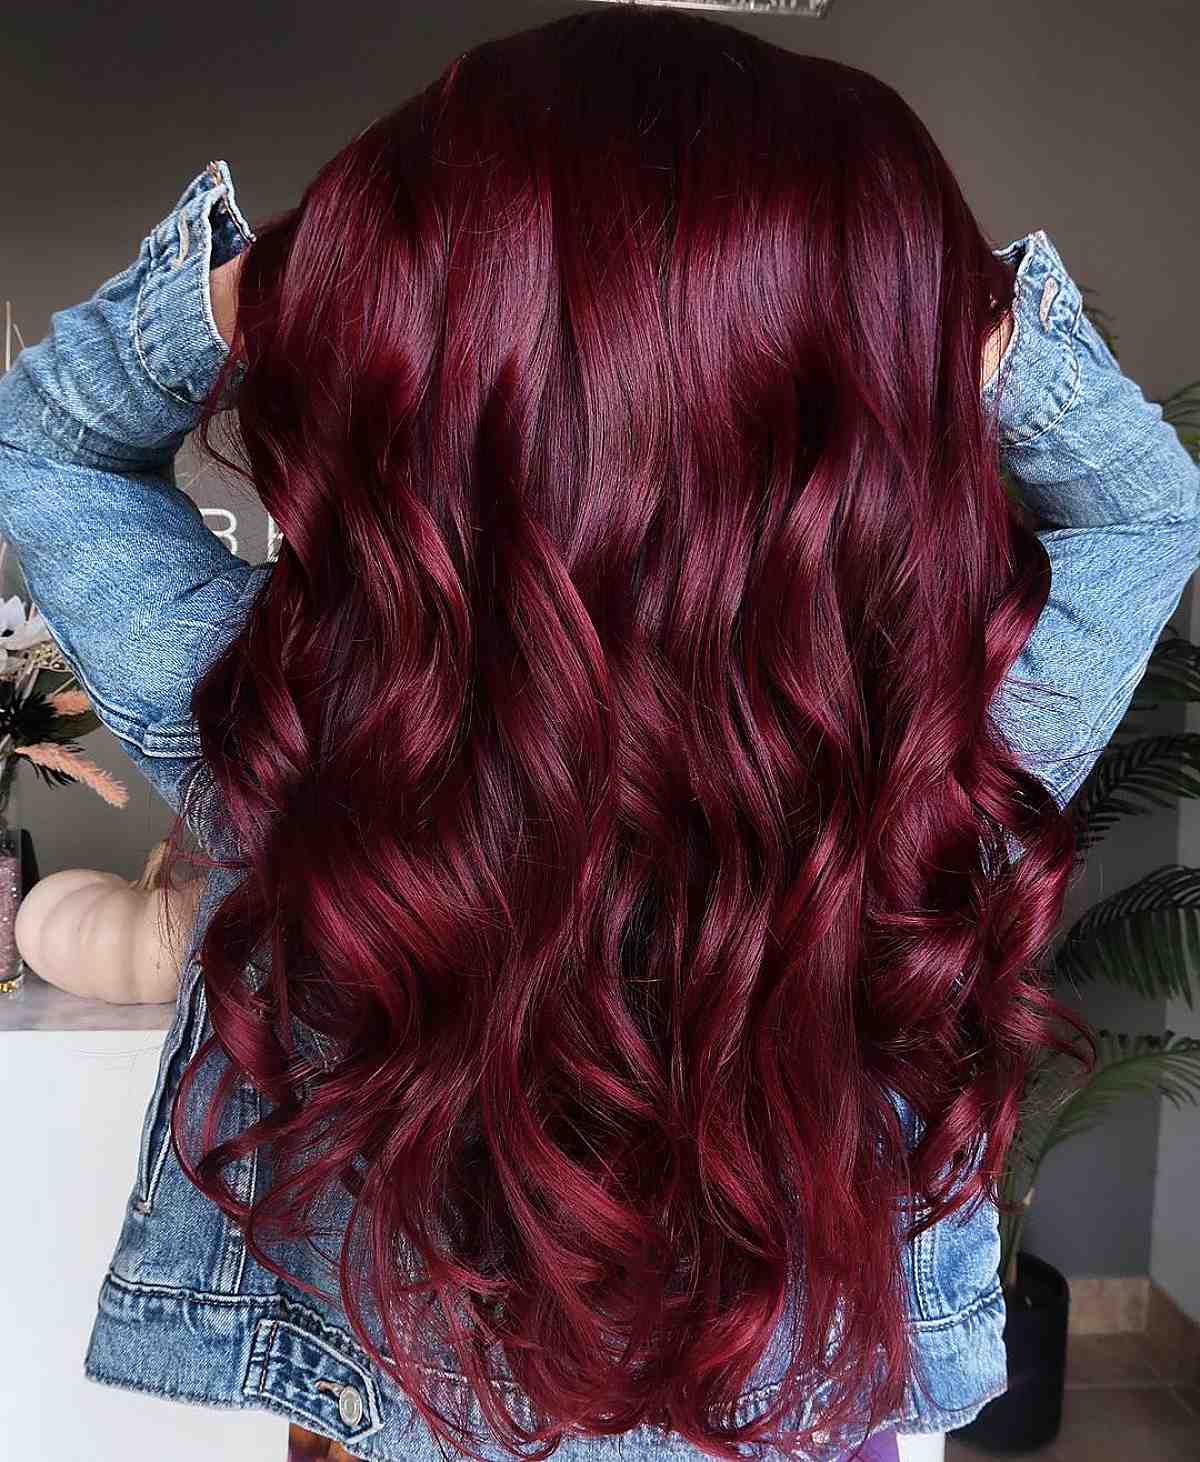 Stunning dark ruby red hair color